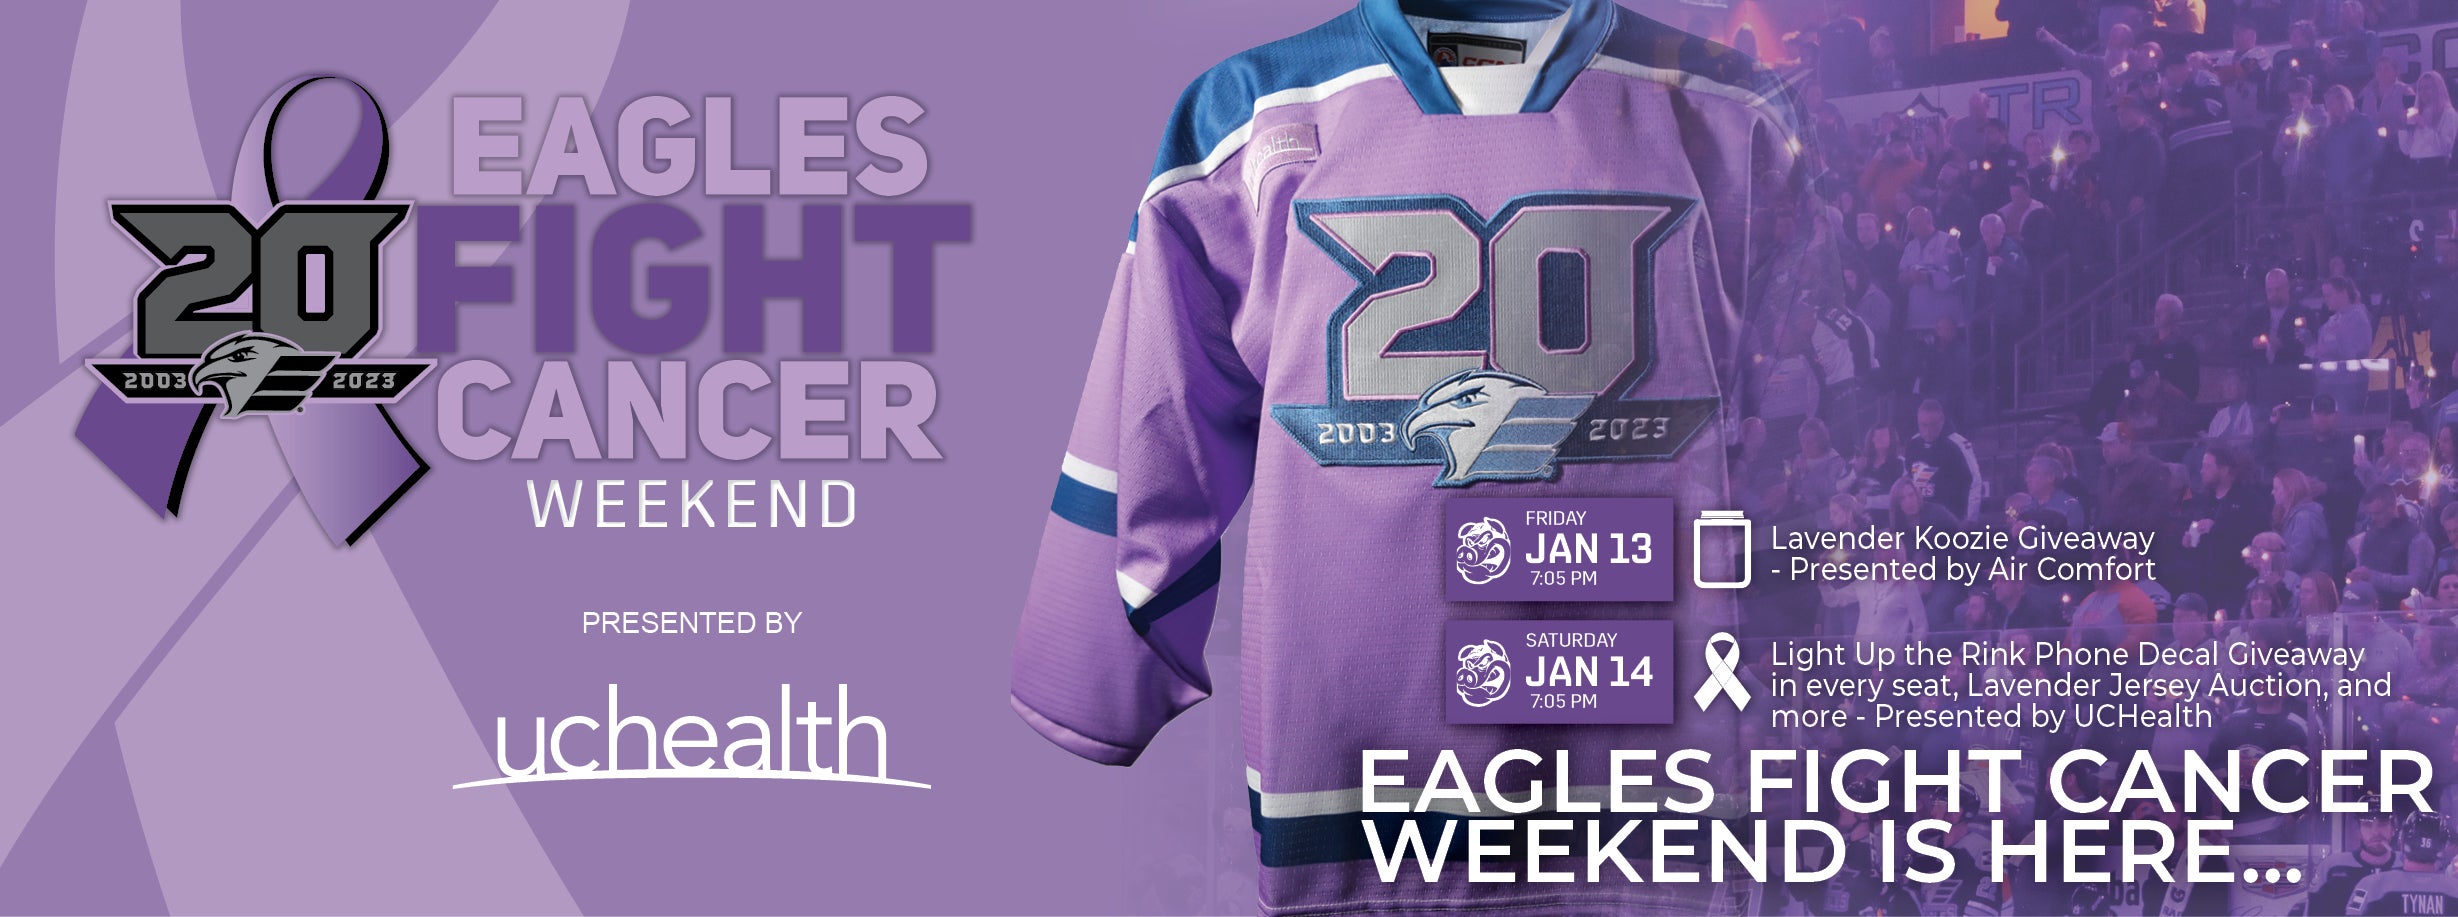 Eagles Fight Cancer Weekend